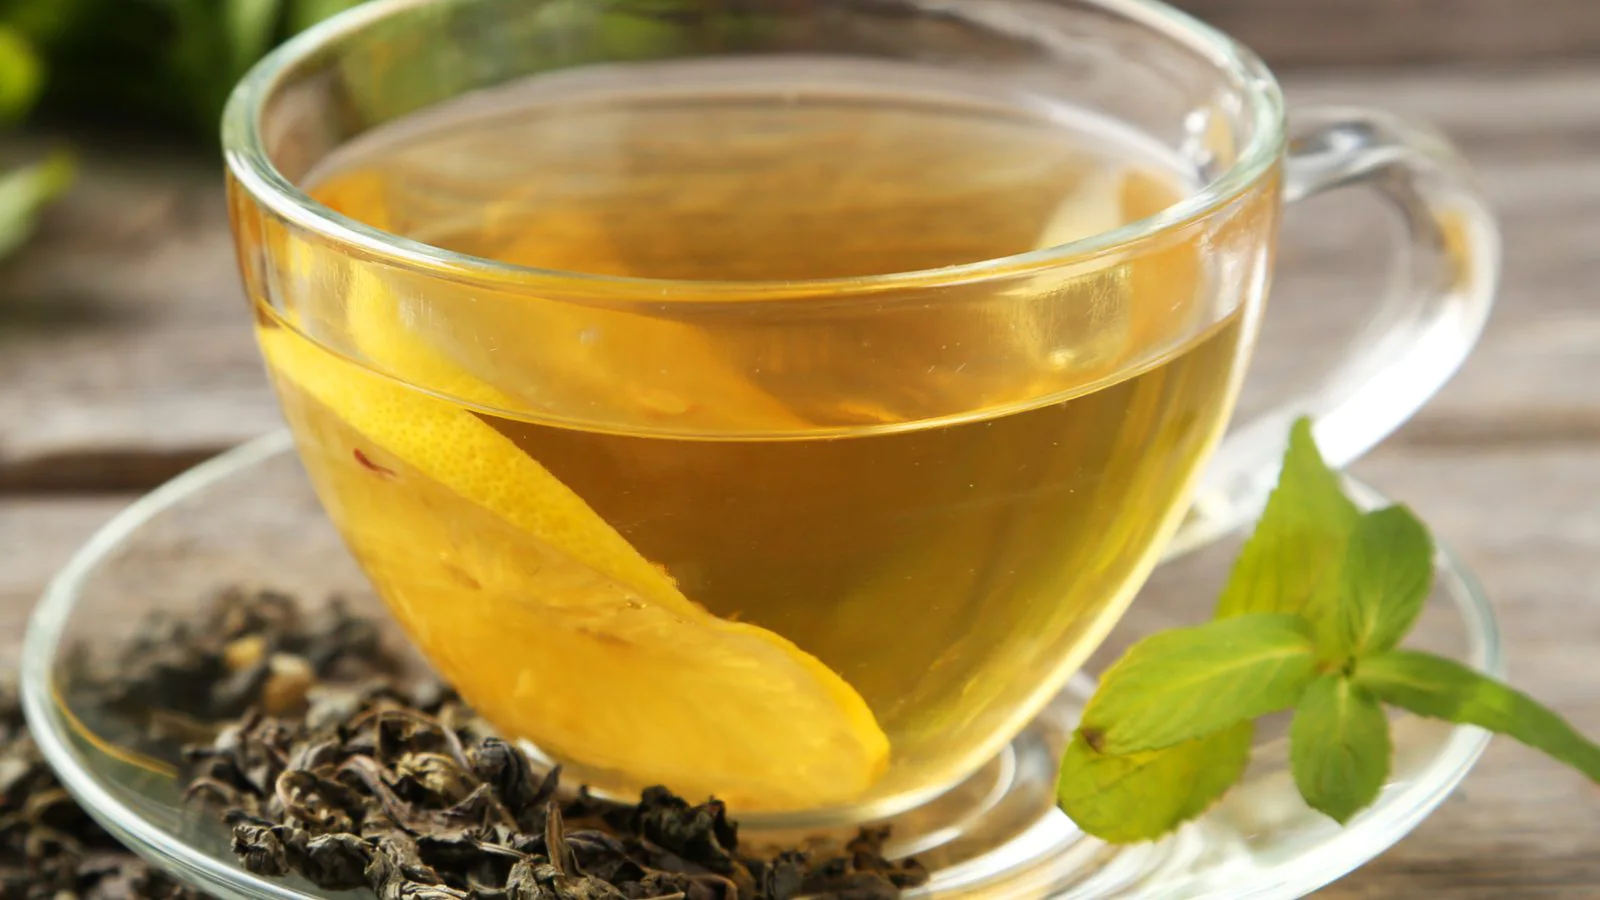 The Top 10 Indian Teas that Make the Palette Sing